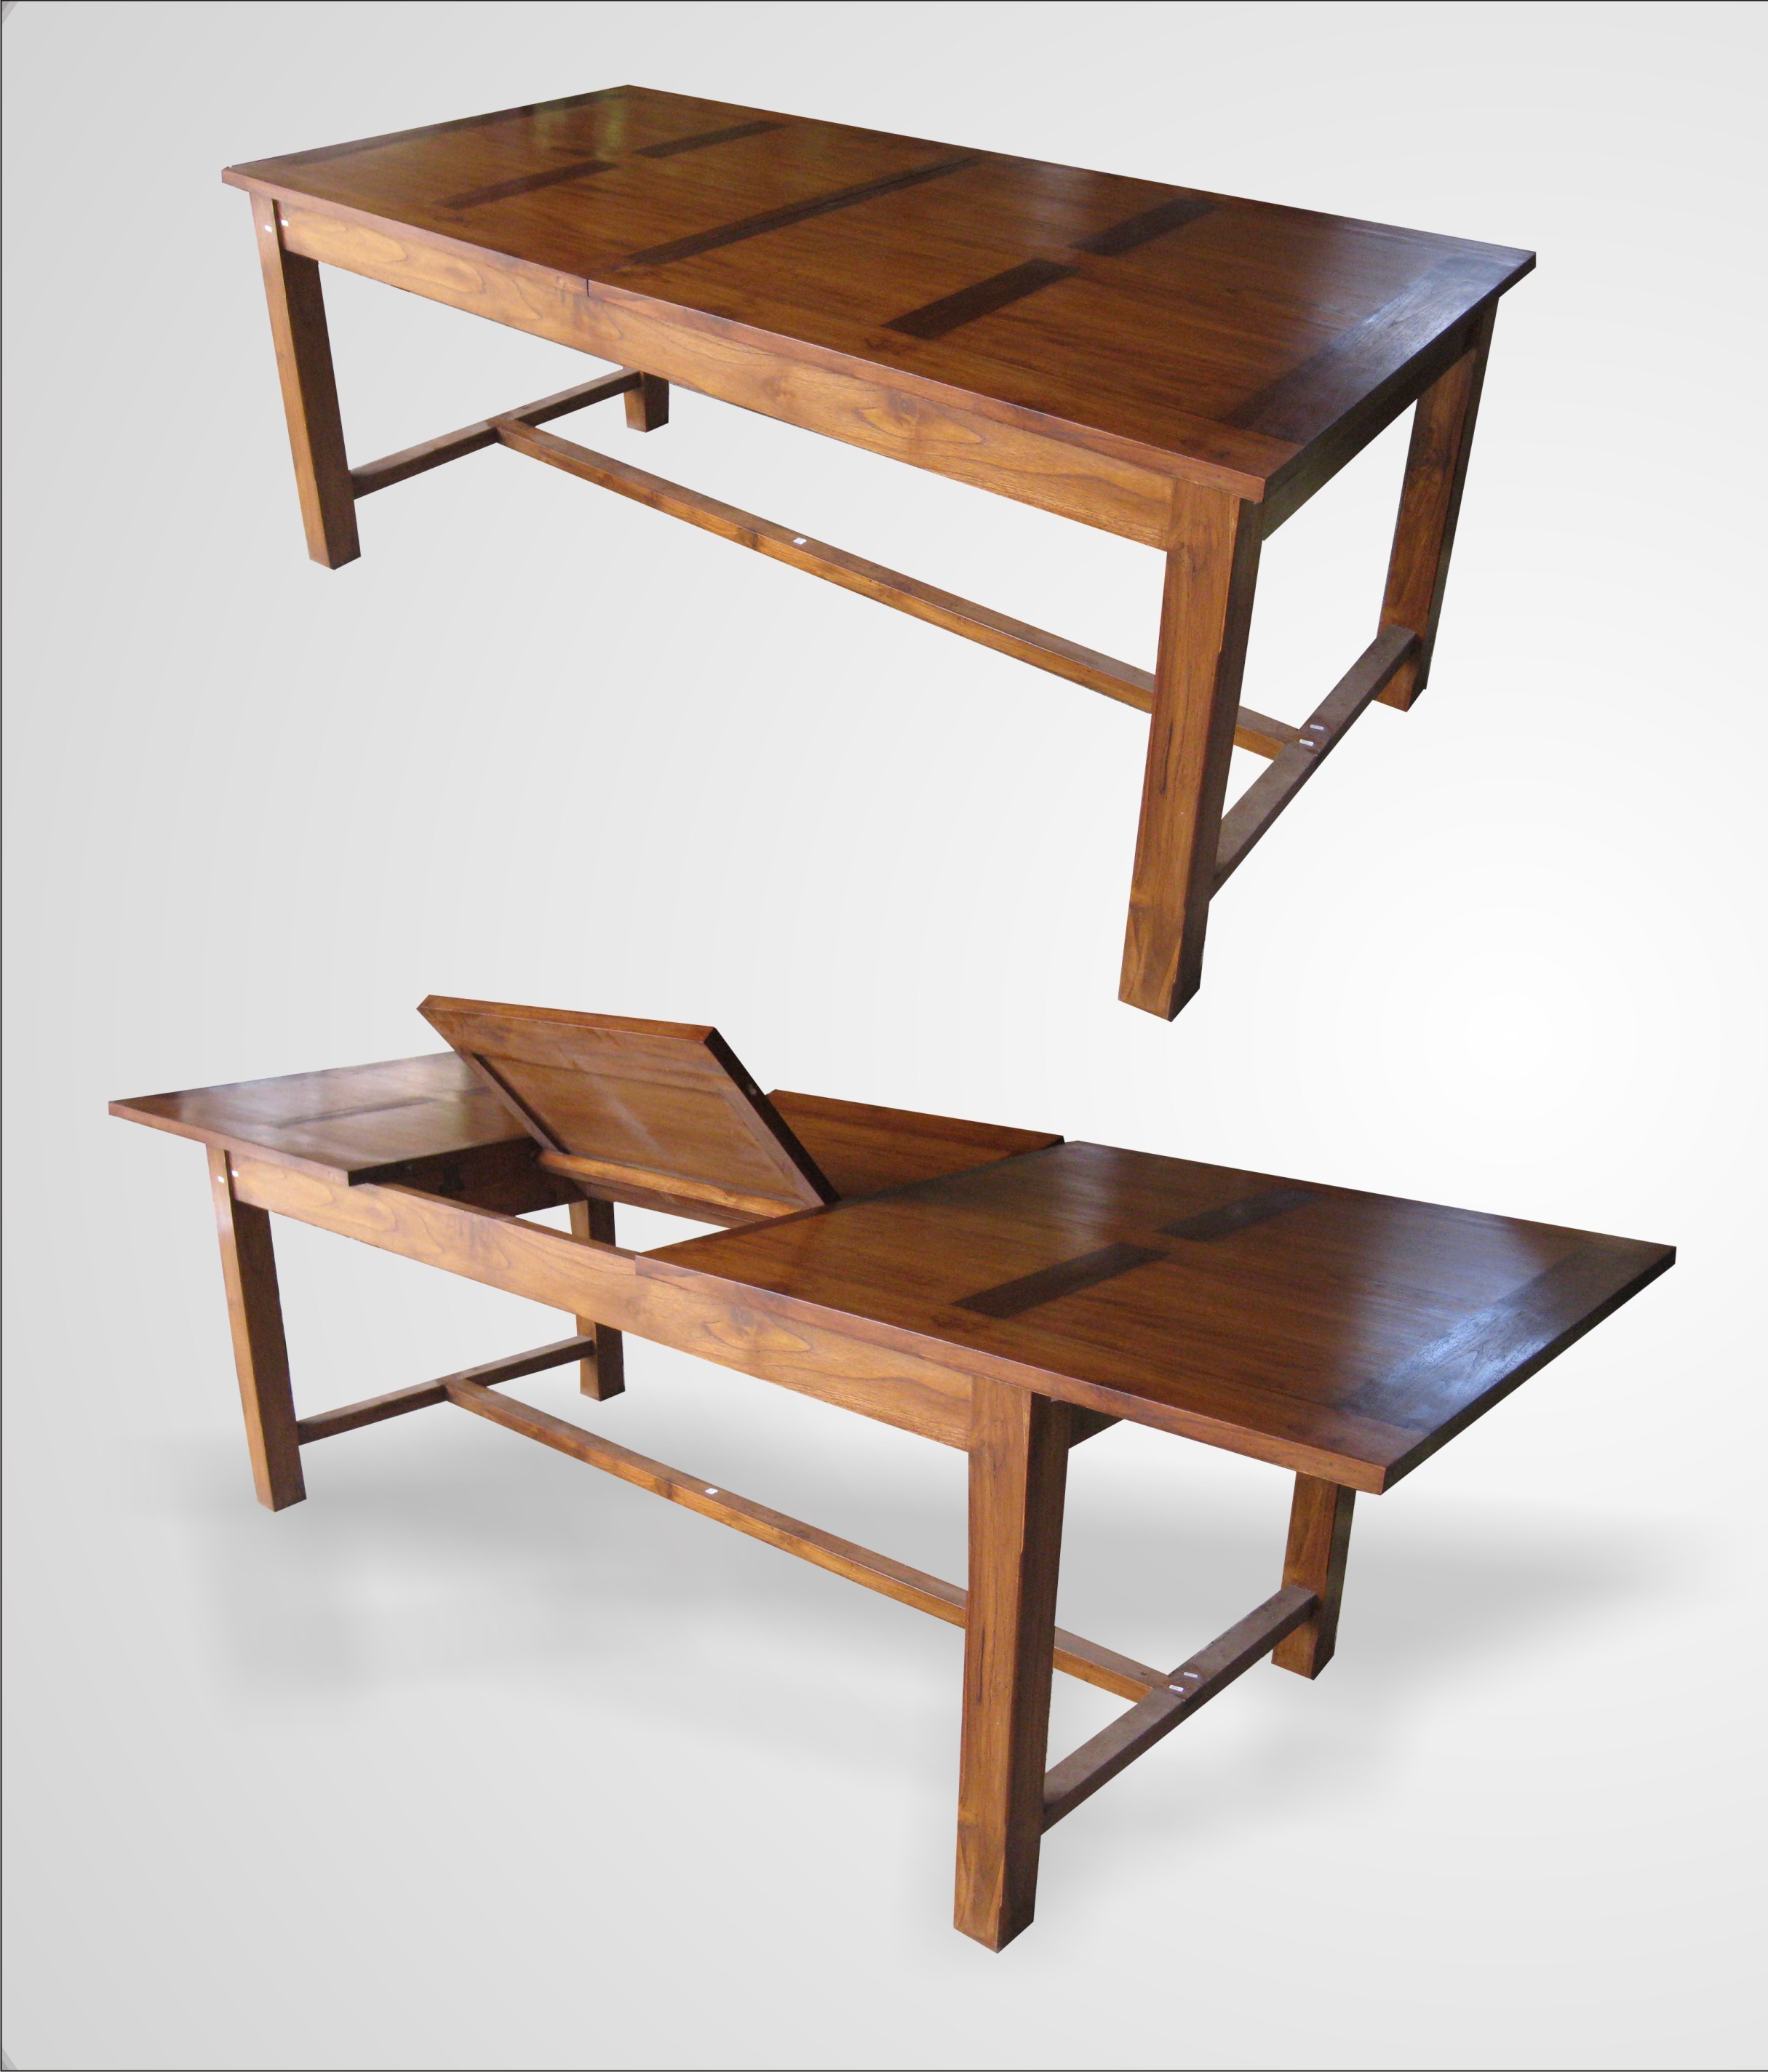 Easy To Clean Teak Dining Table: Hassle Free Maintenance